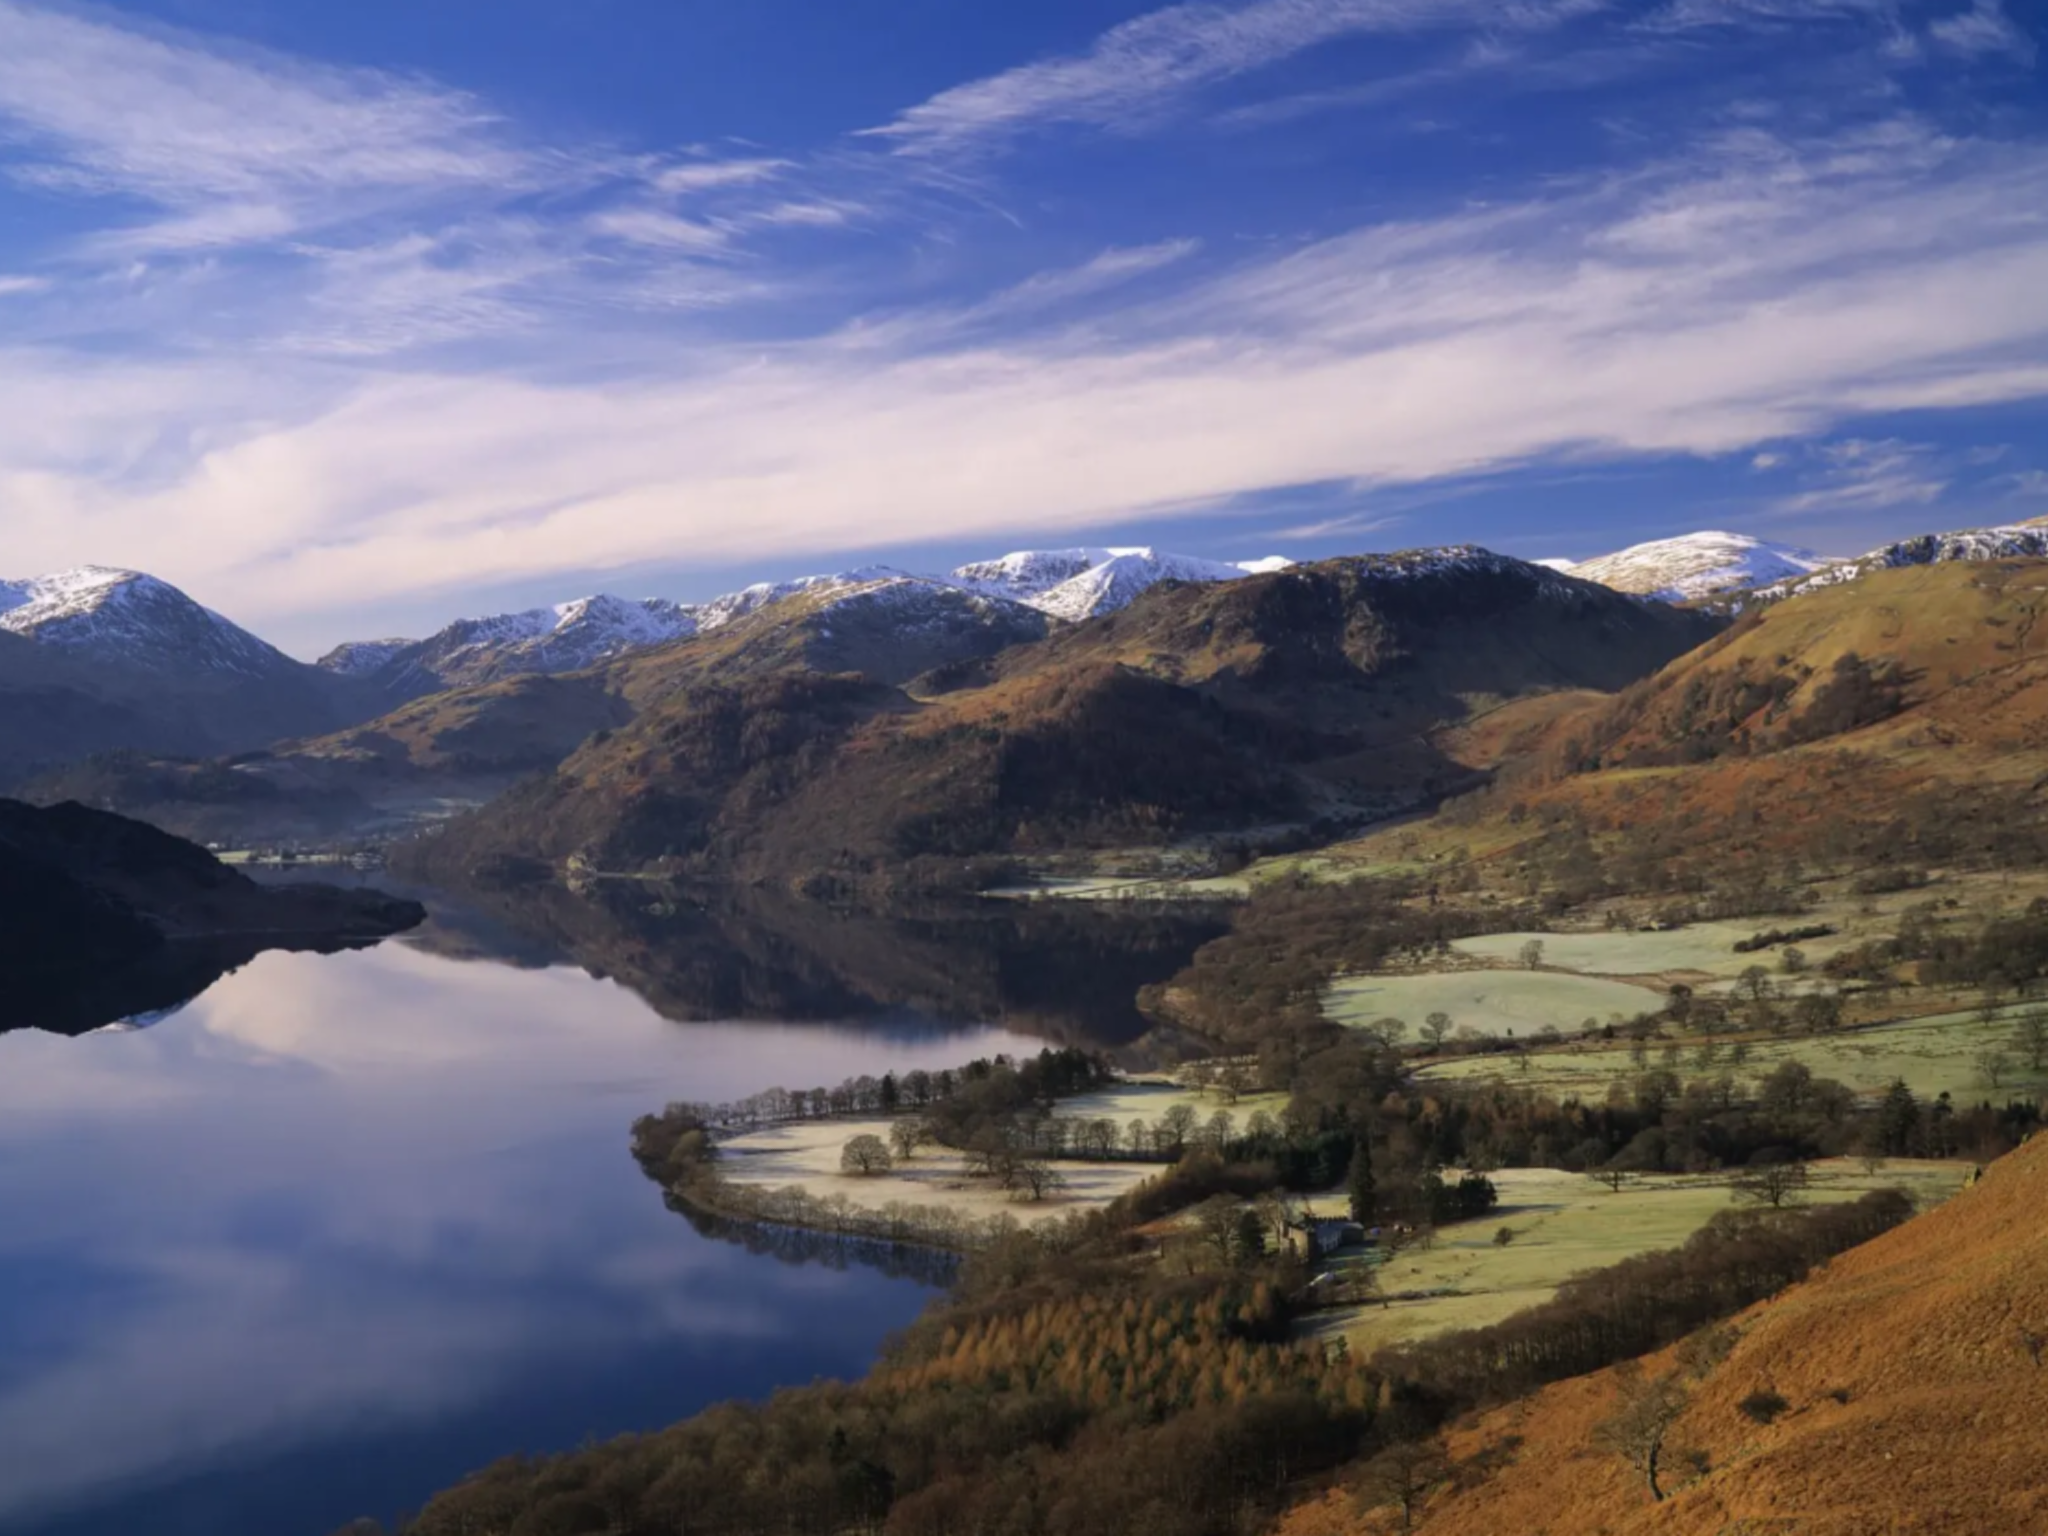 Panoramic lake views of Ullswater can be seen from glamping pods at The Quiet Site